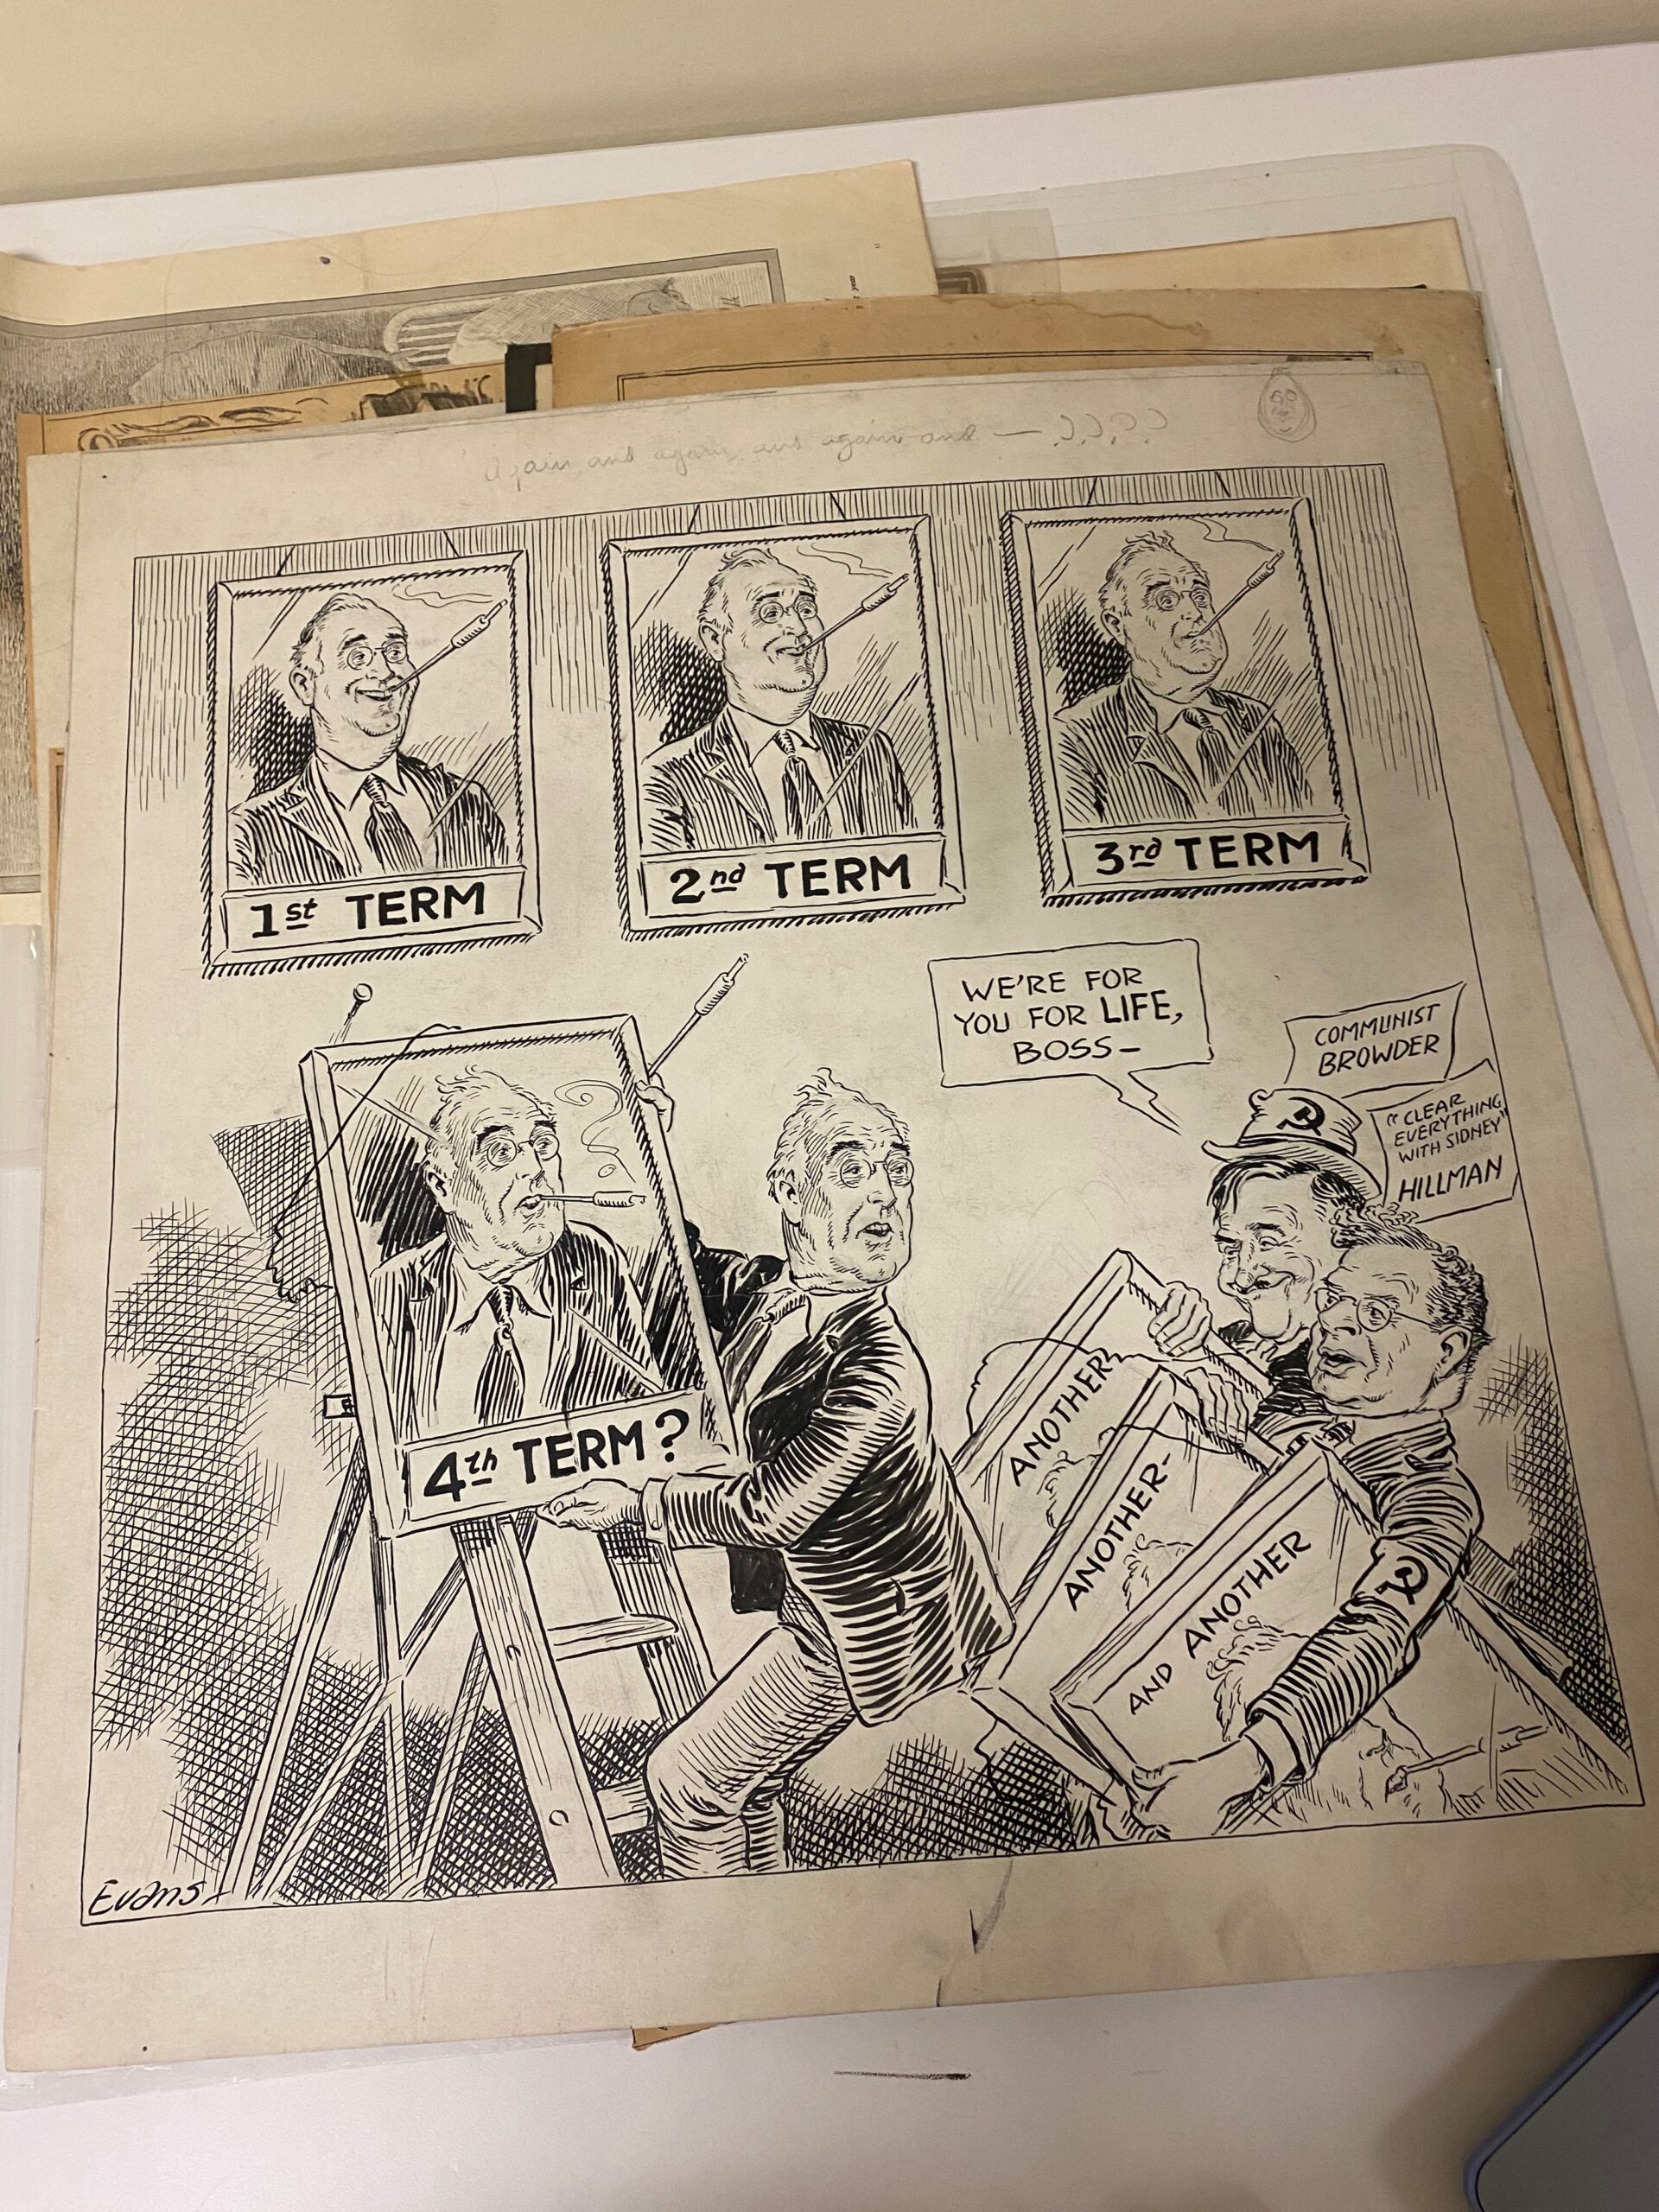 political cartoon depicting cartoonists creating portraits of FDR each representing another term as president and showing FDR increasingly older.